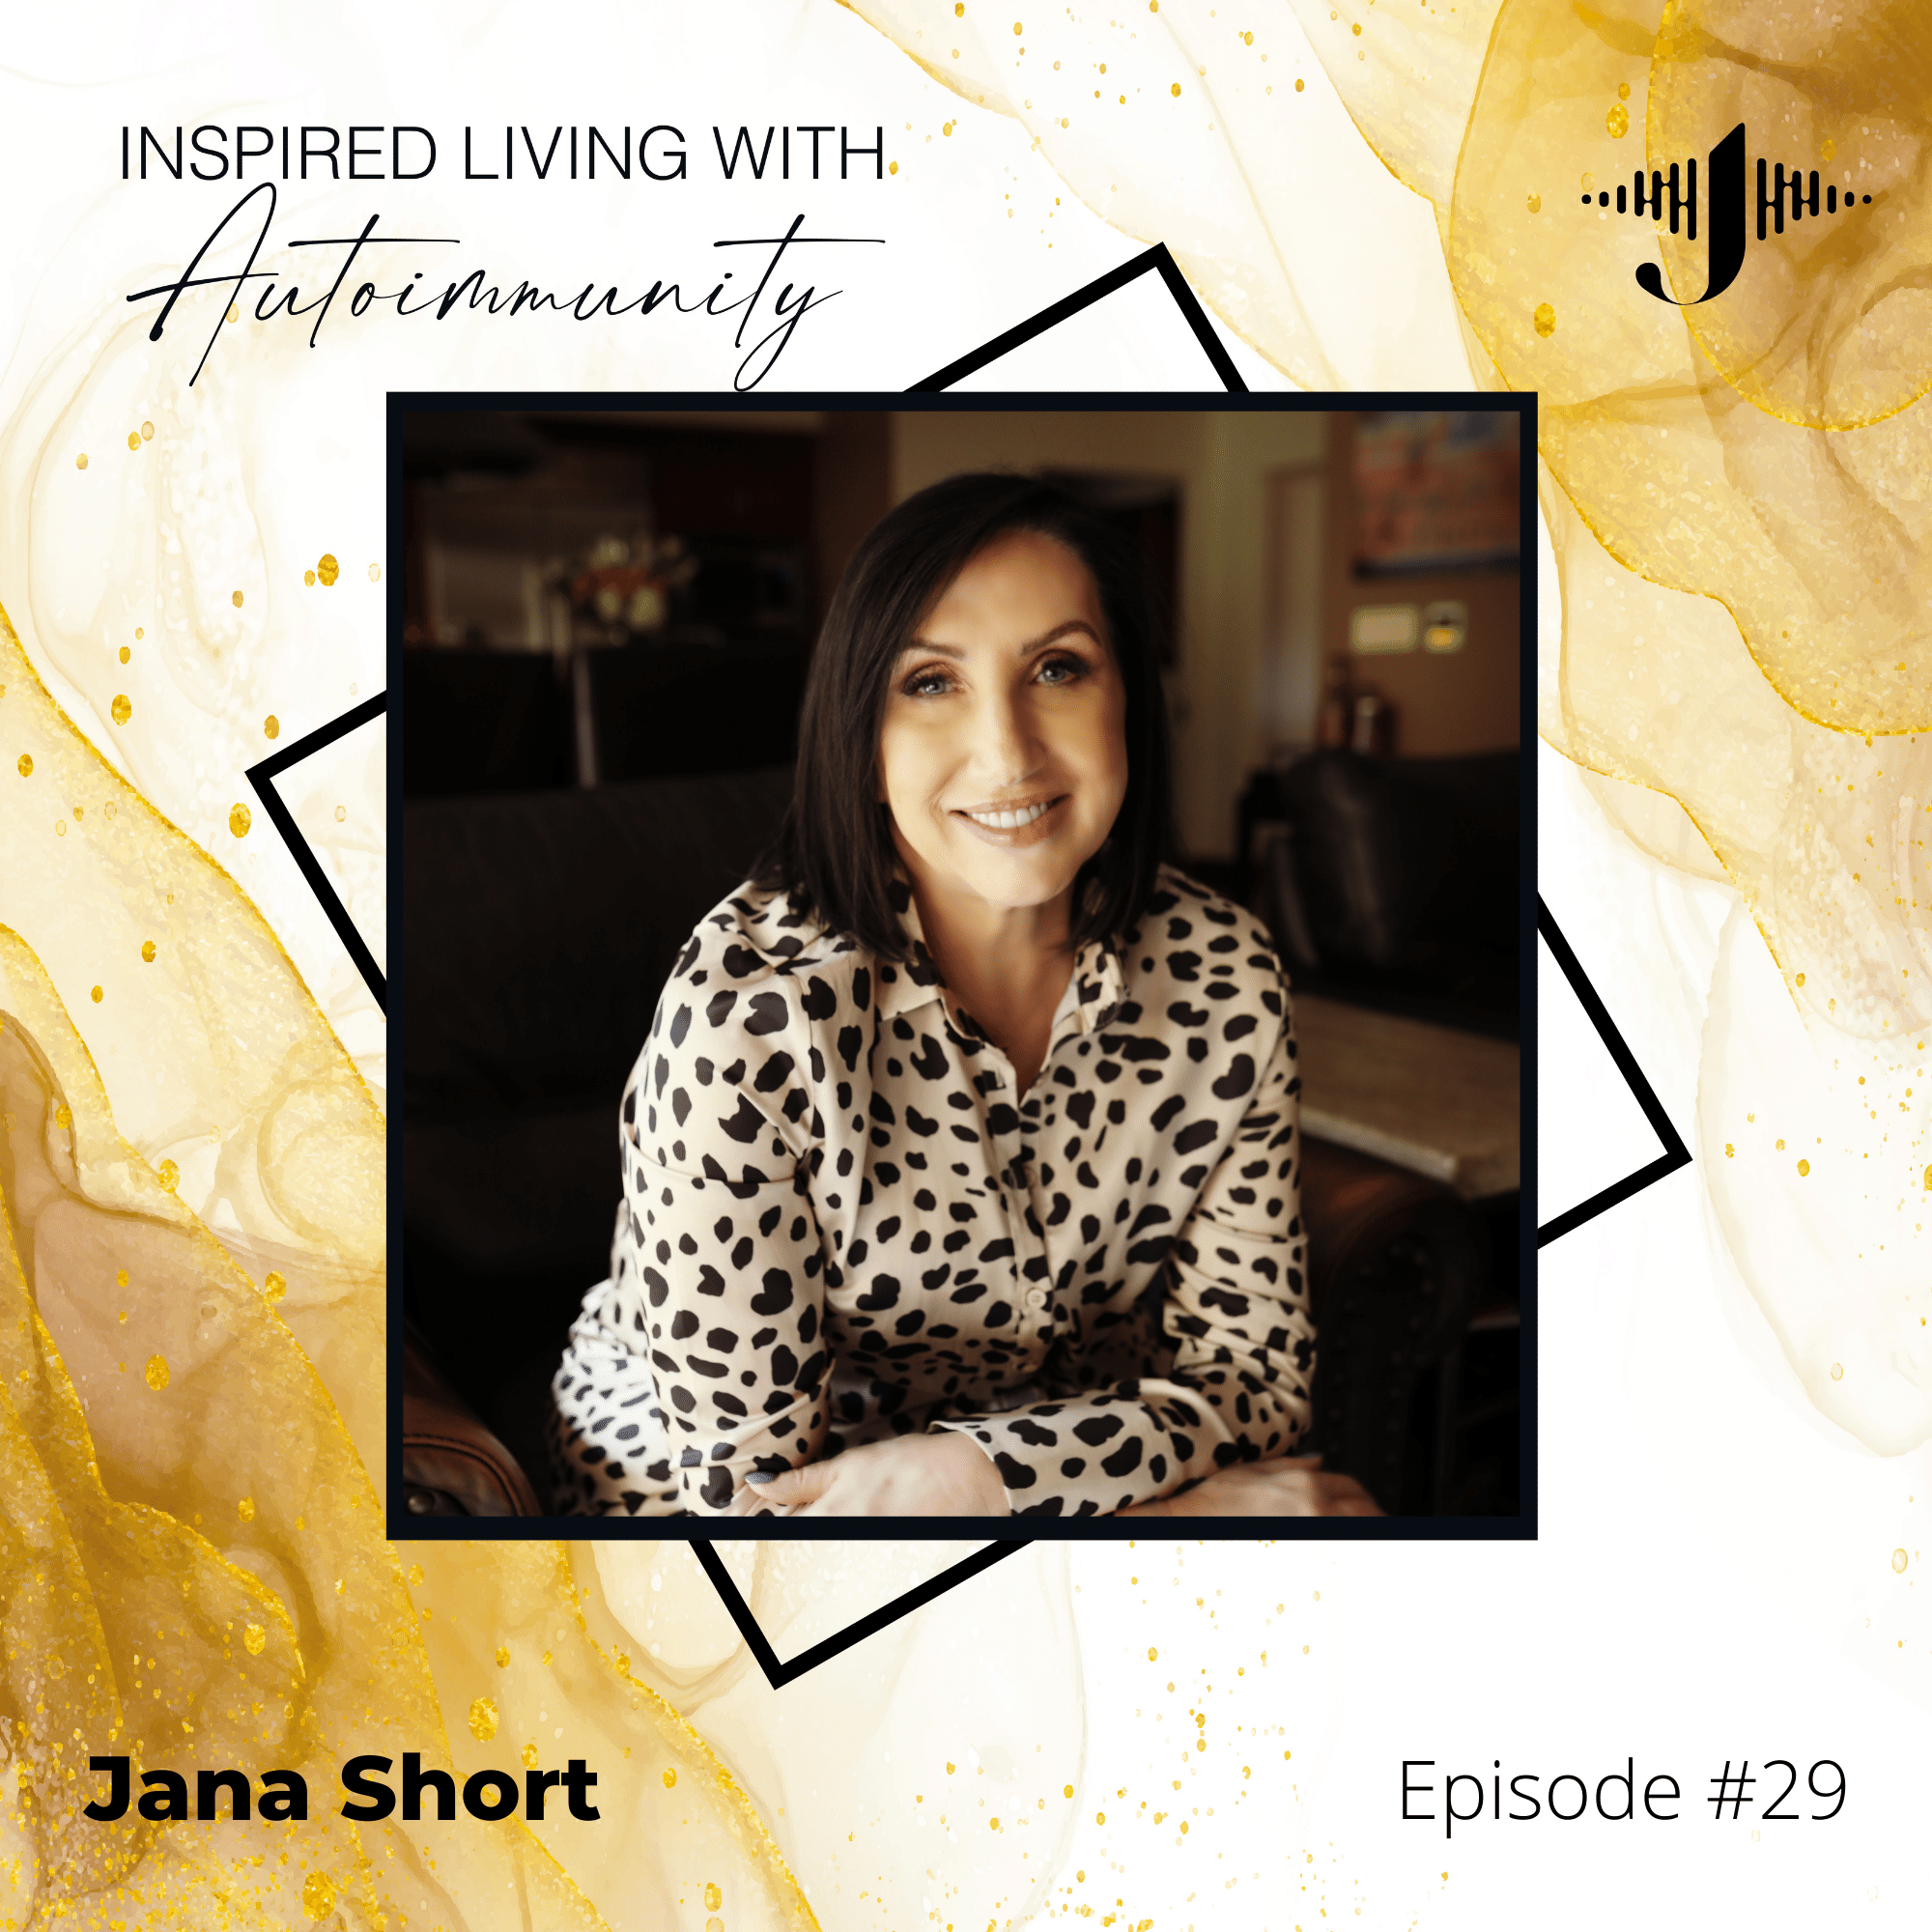 Jana Short: Change Your Story to Change Your Life